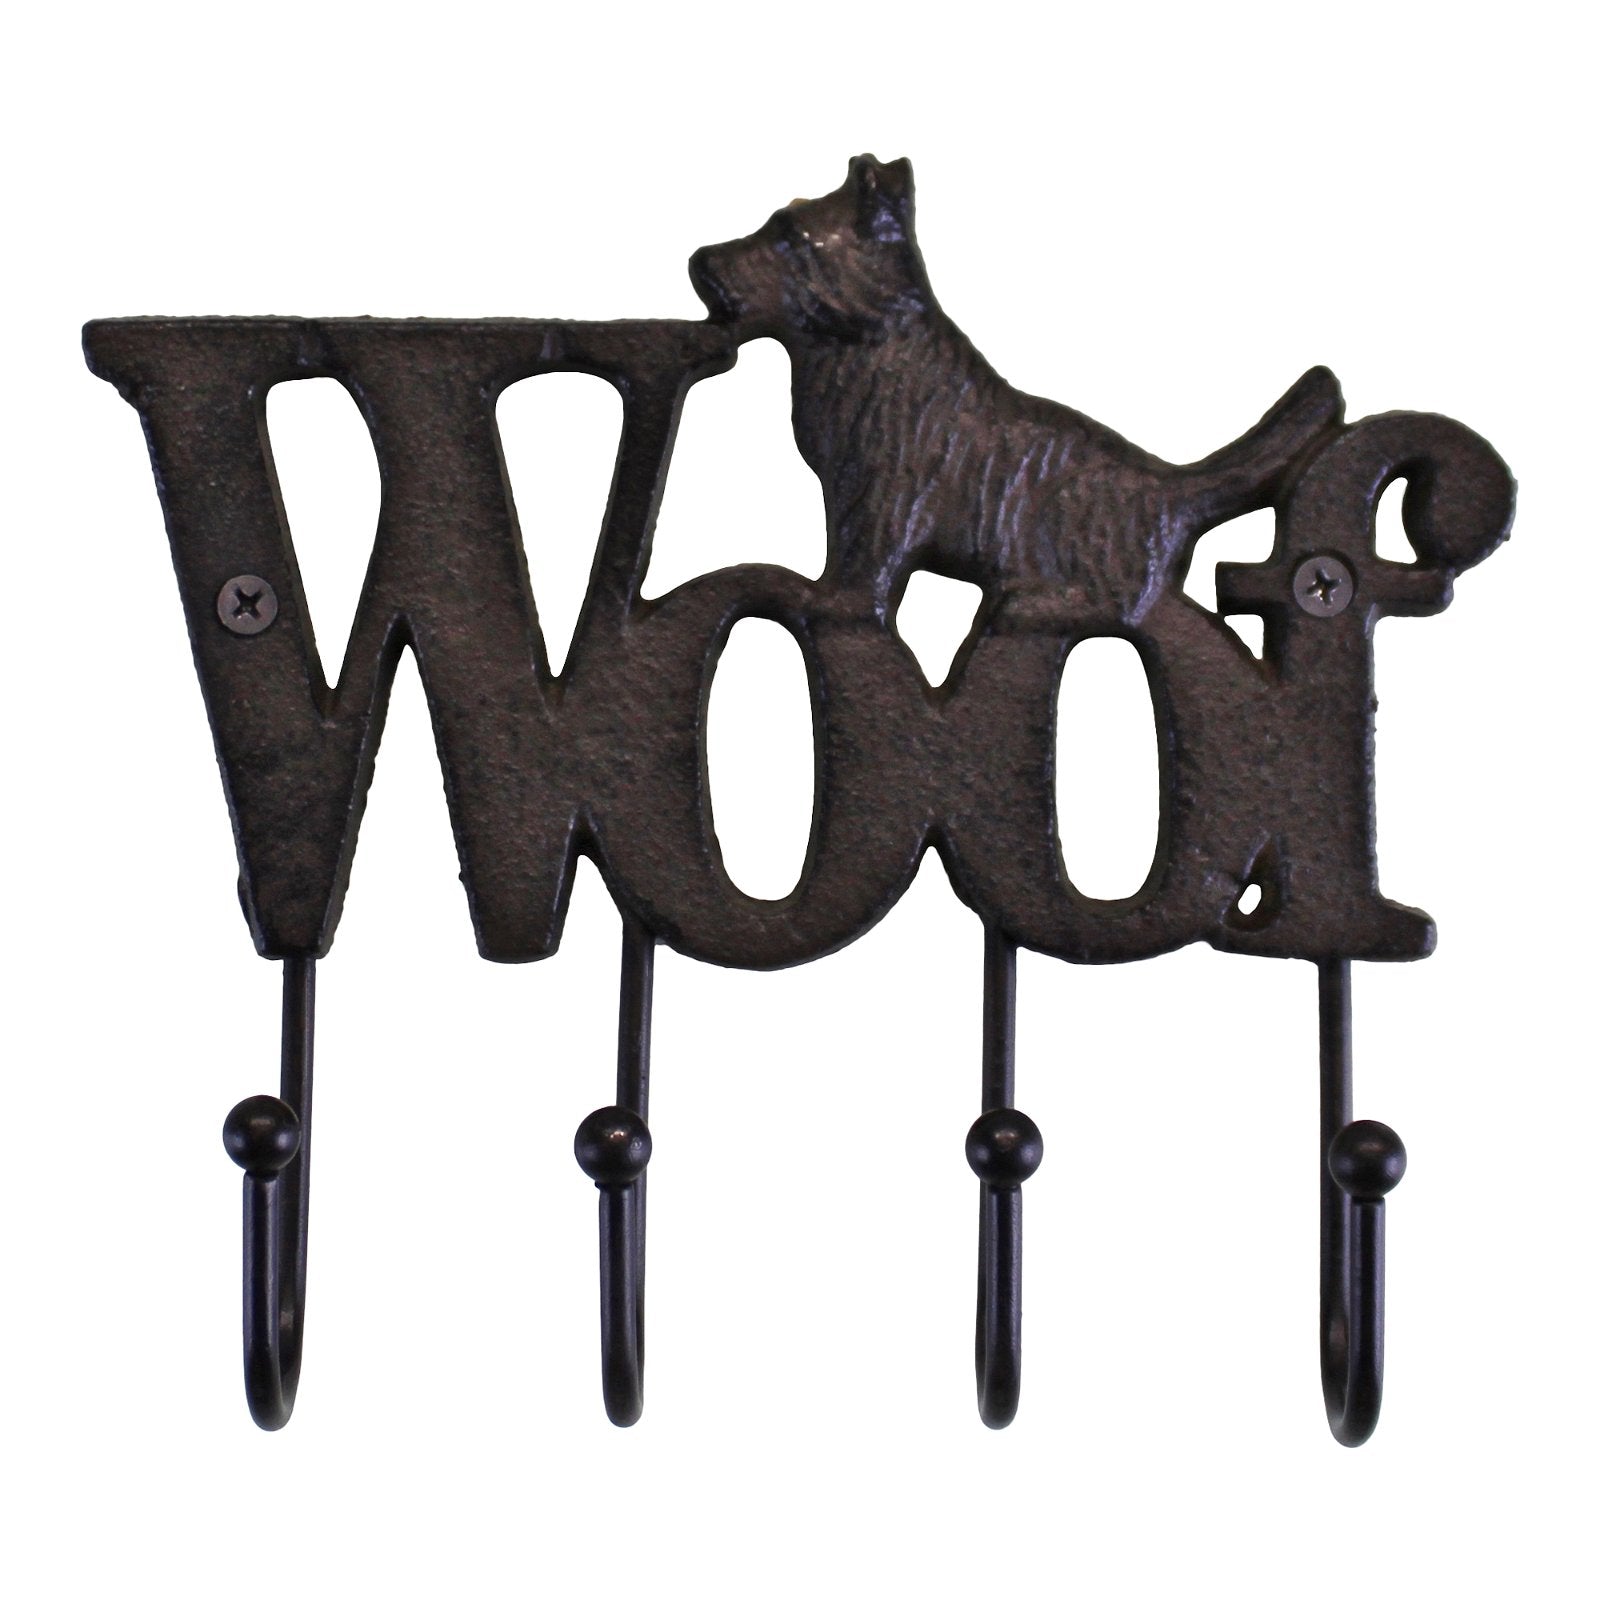 Rustic Cast Iron Wall Hooks, Dog Design With 4 Hooks - The Pop Up Deli